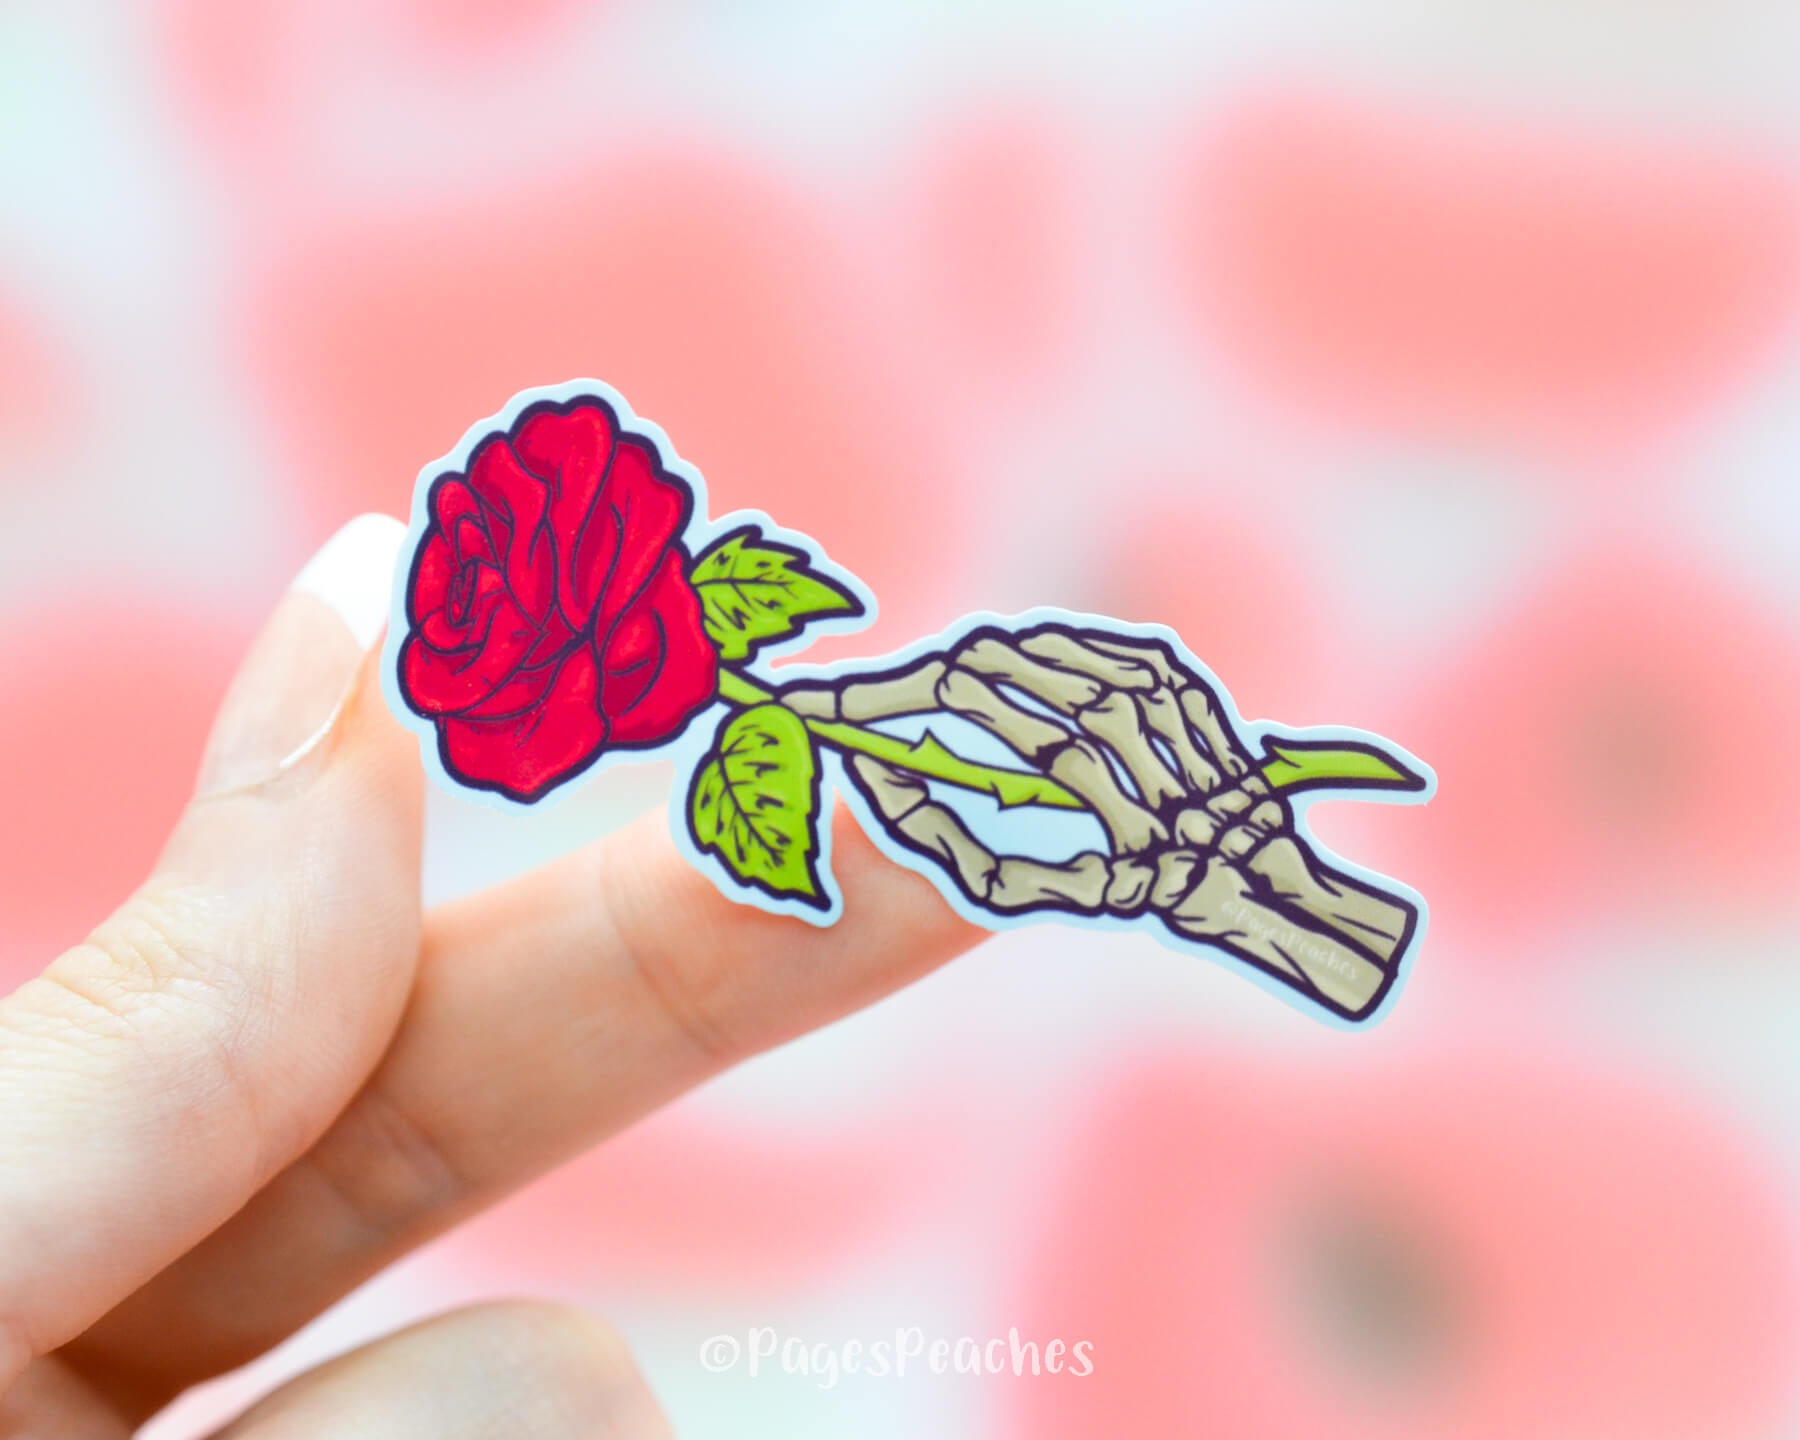 Sticker of a skeleton hand holding a bright red rose